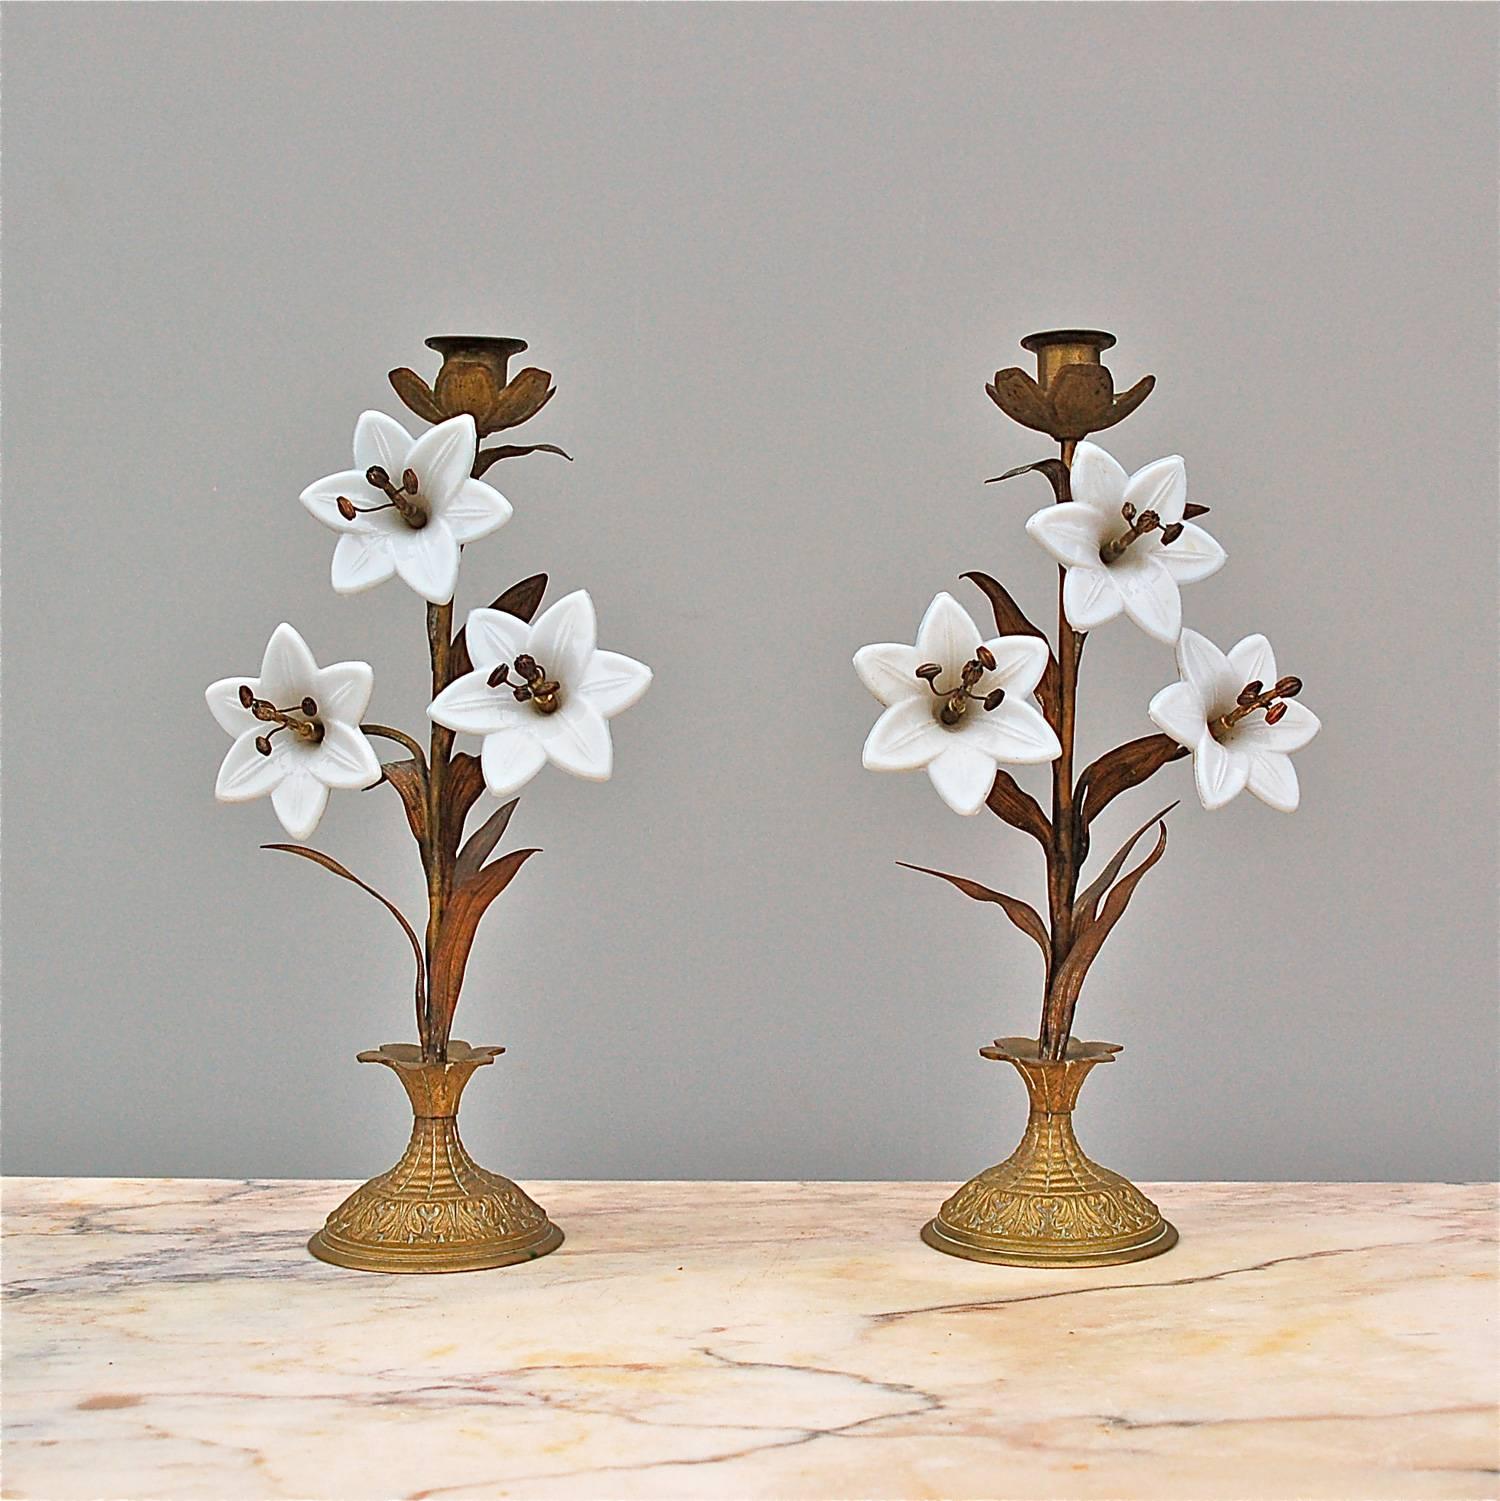 A matching pair of 19th century French, candlesticks which originally would have been used on a church altar. Each candlestick is made from finely embossed brass decorated with Fine, long leaves and white opaline glass flowers that represent the